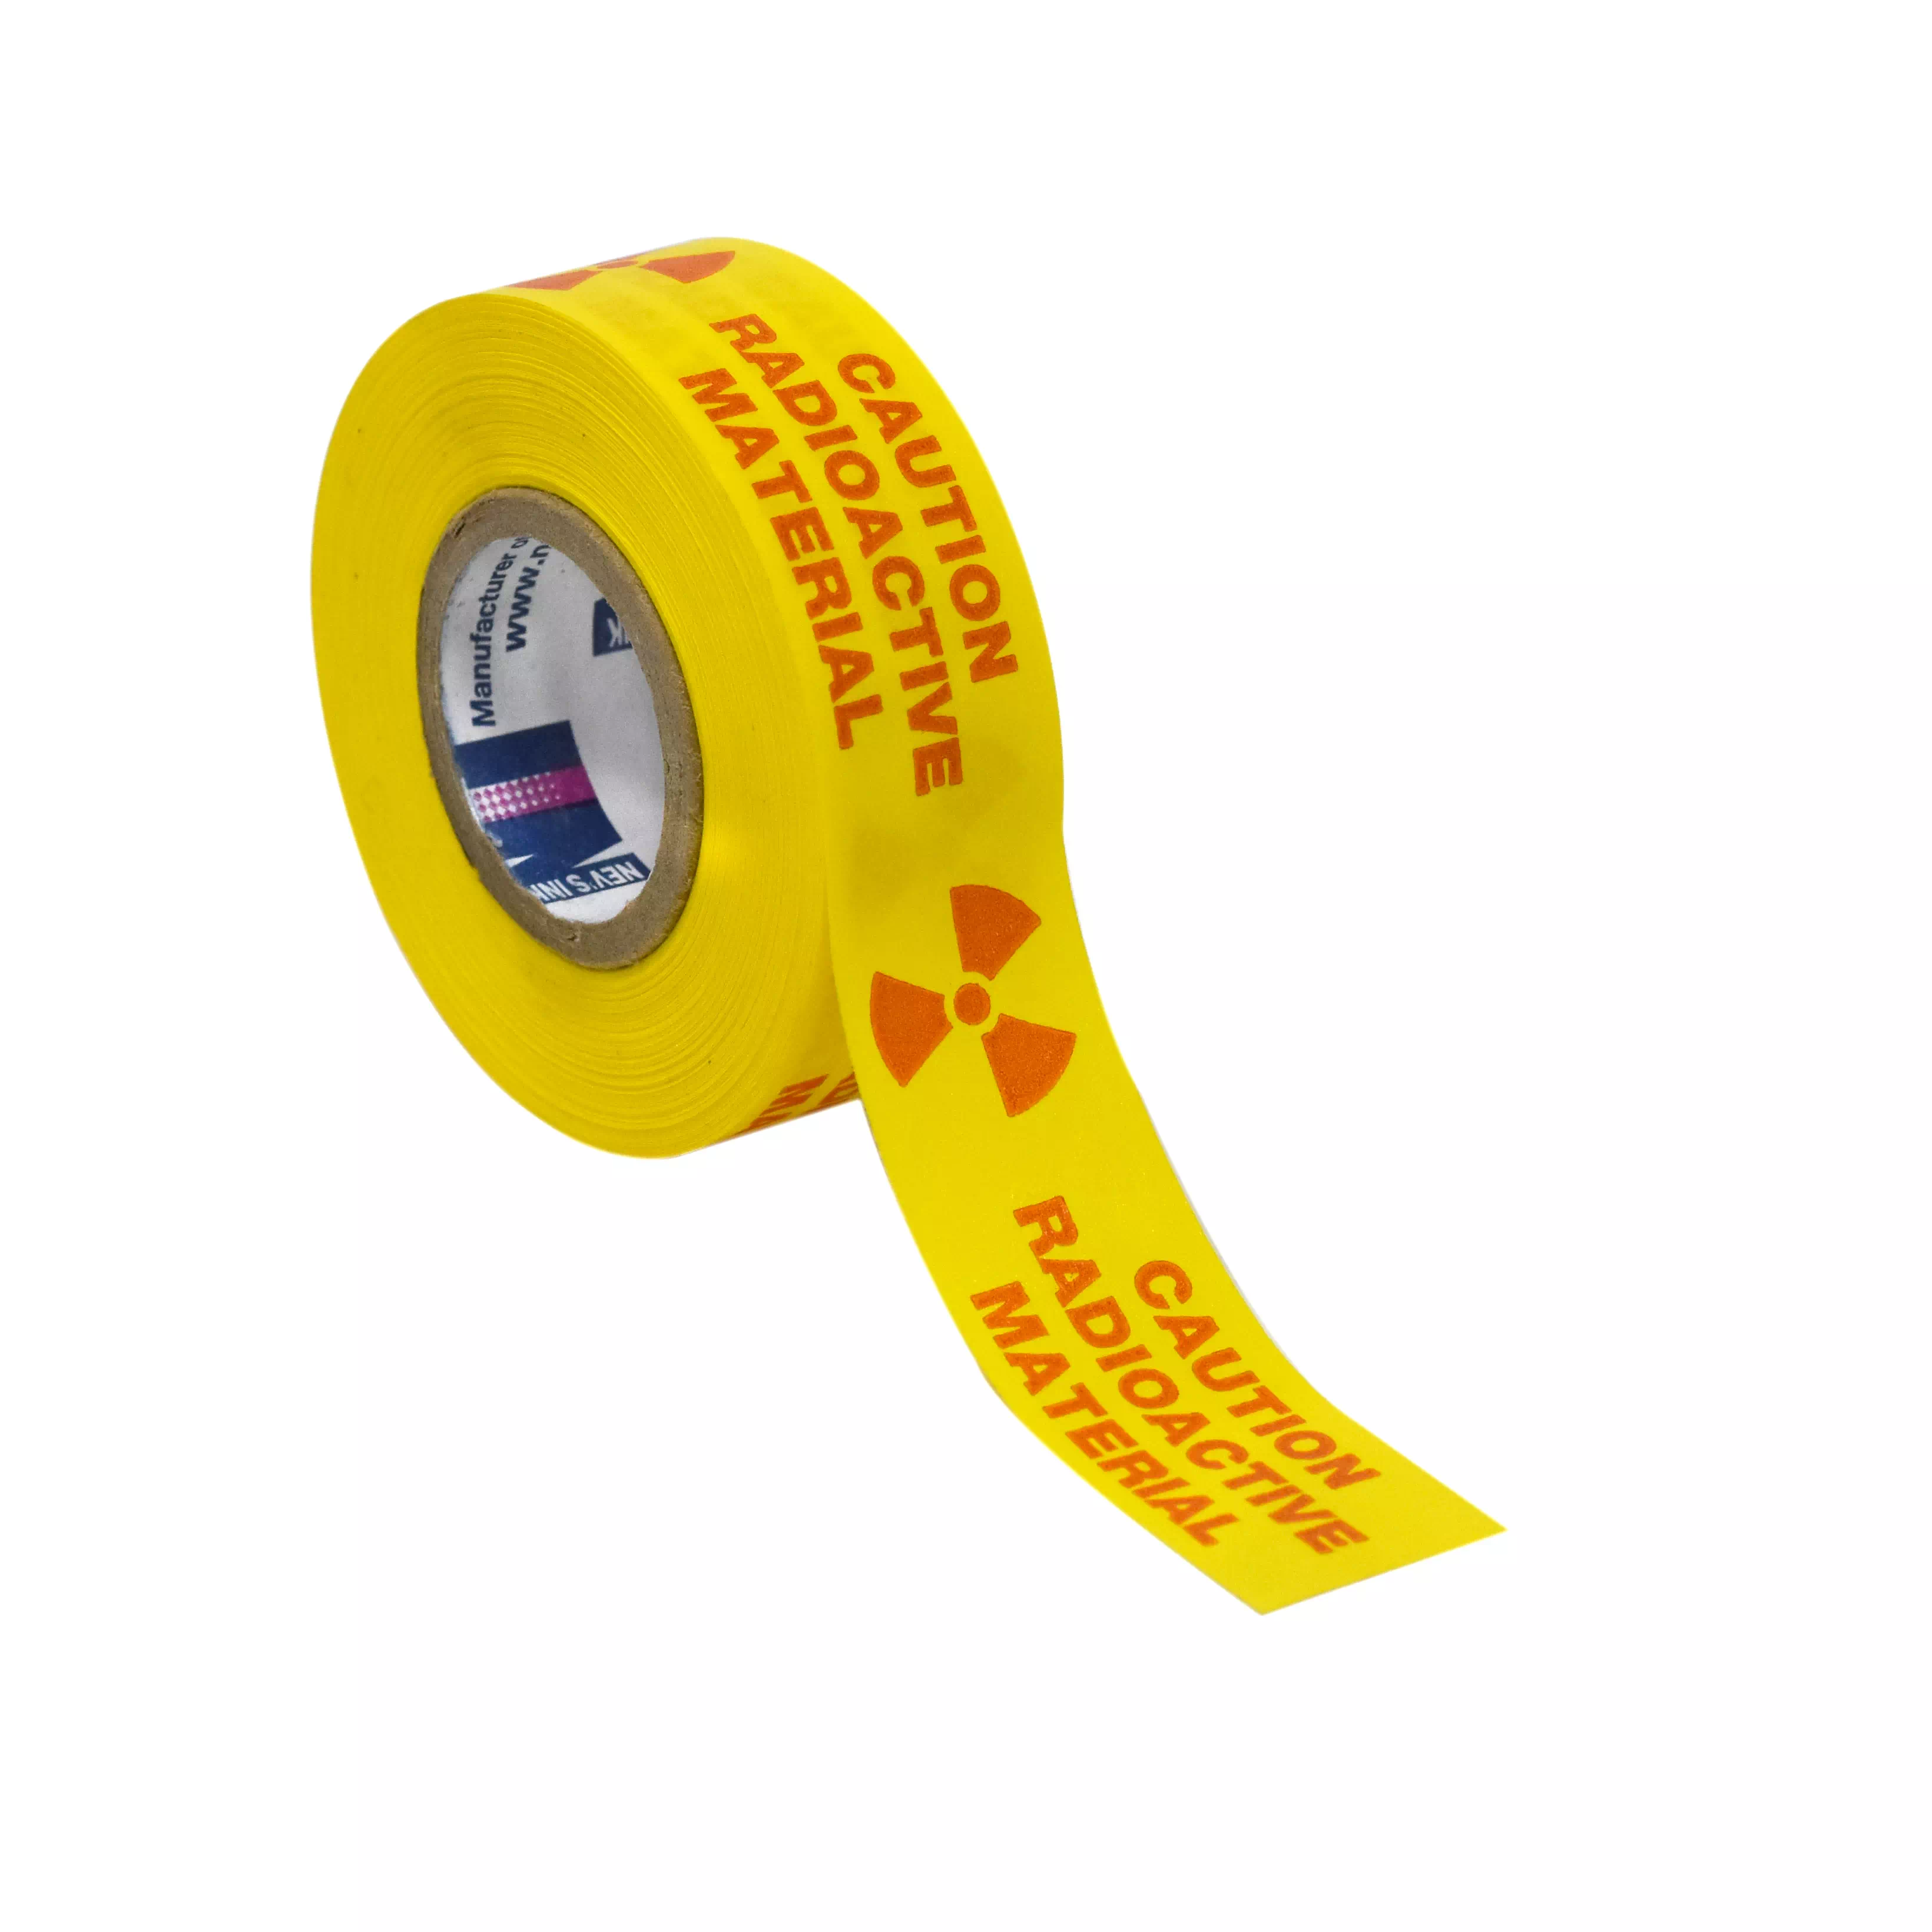 Caution Radioactive Material - Labeling Tape